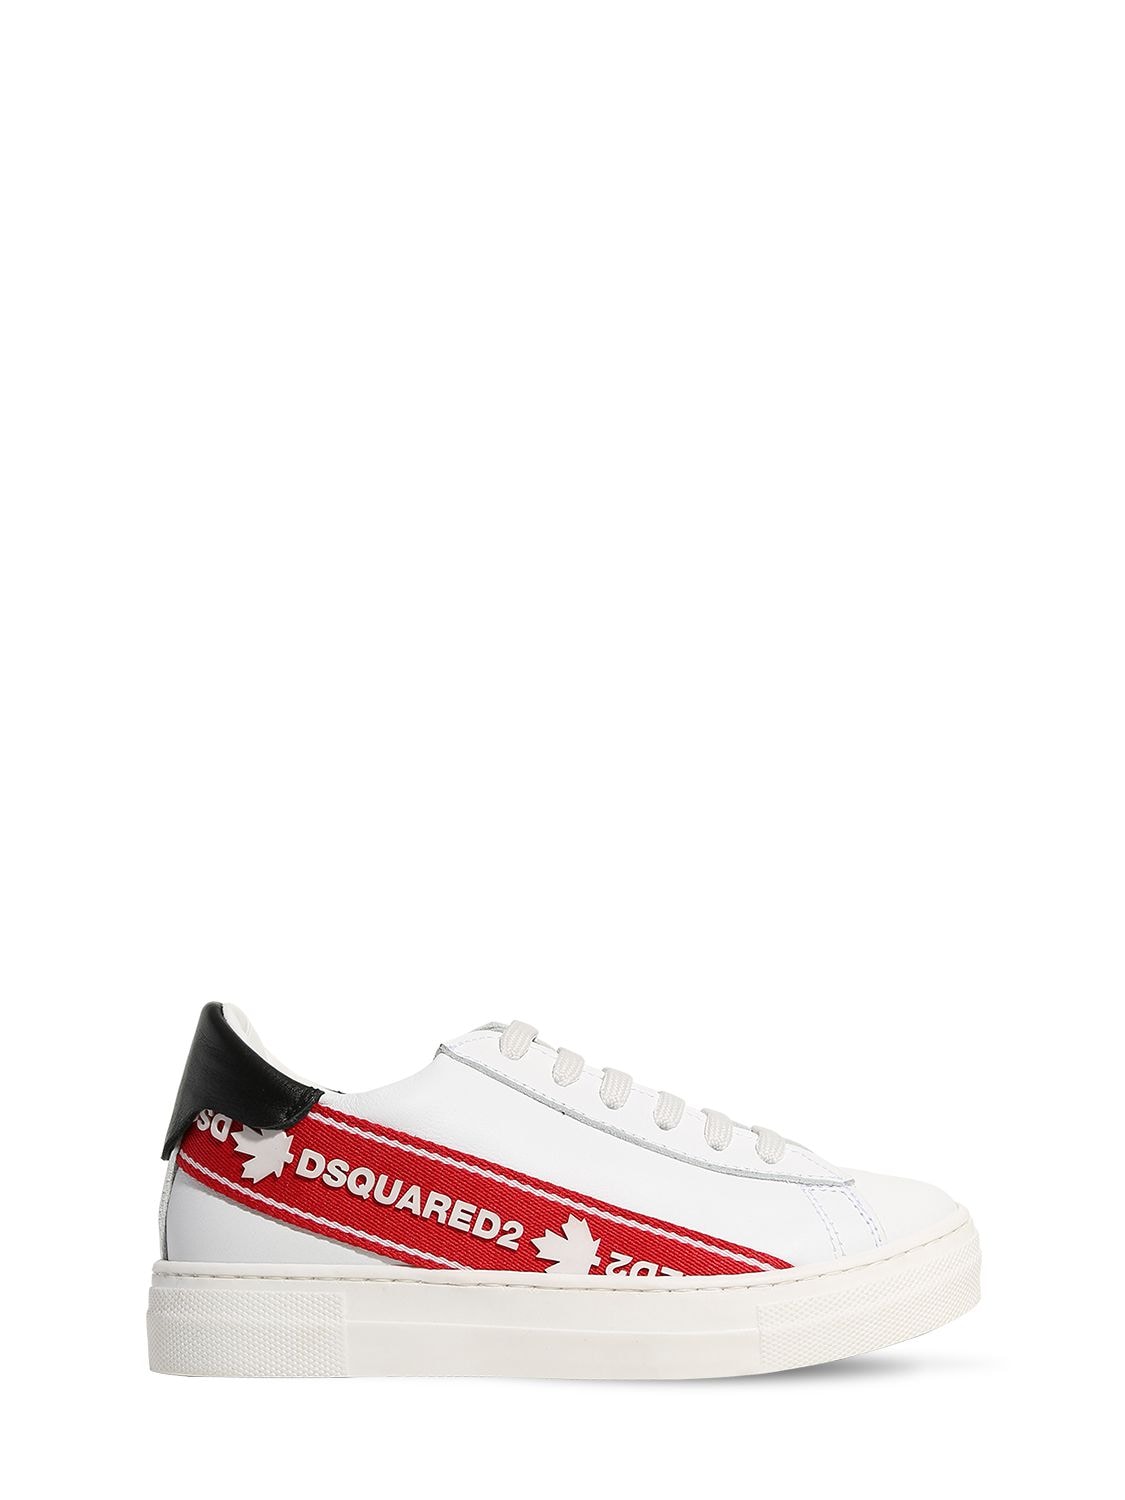 DSQUARED2 LEATHER LACE-UP SNEAKERS W/ LOGO BAND,72I91X042-VKFSIDE1